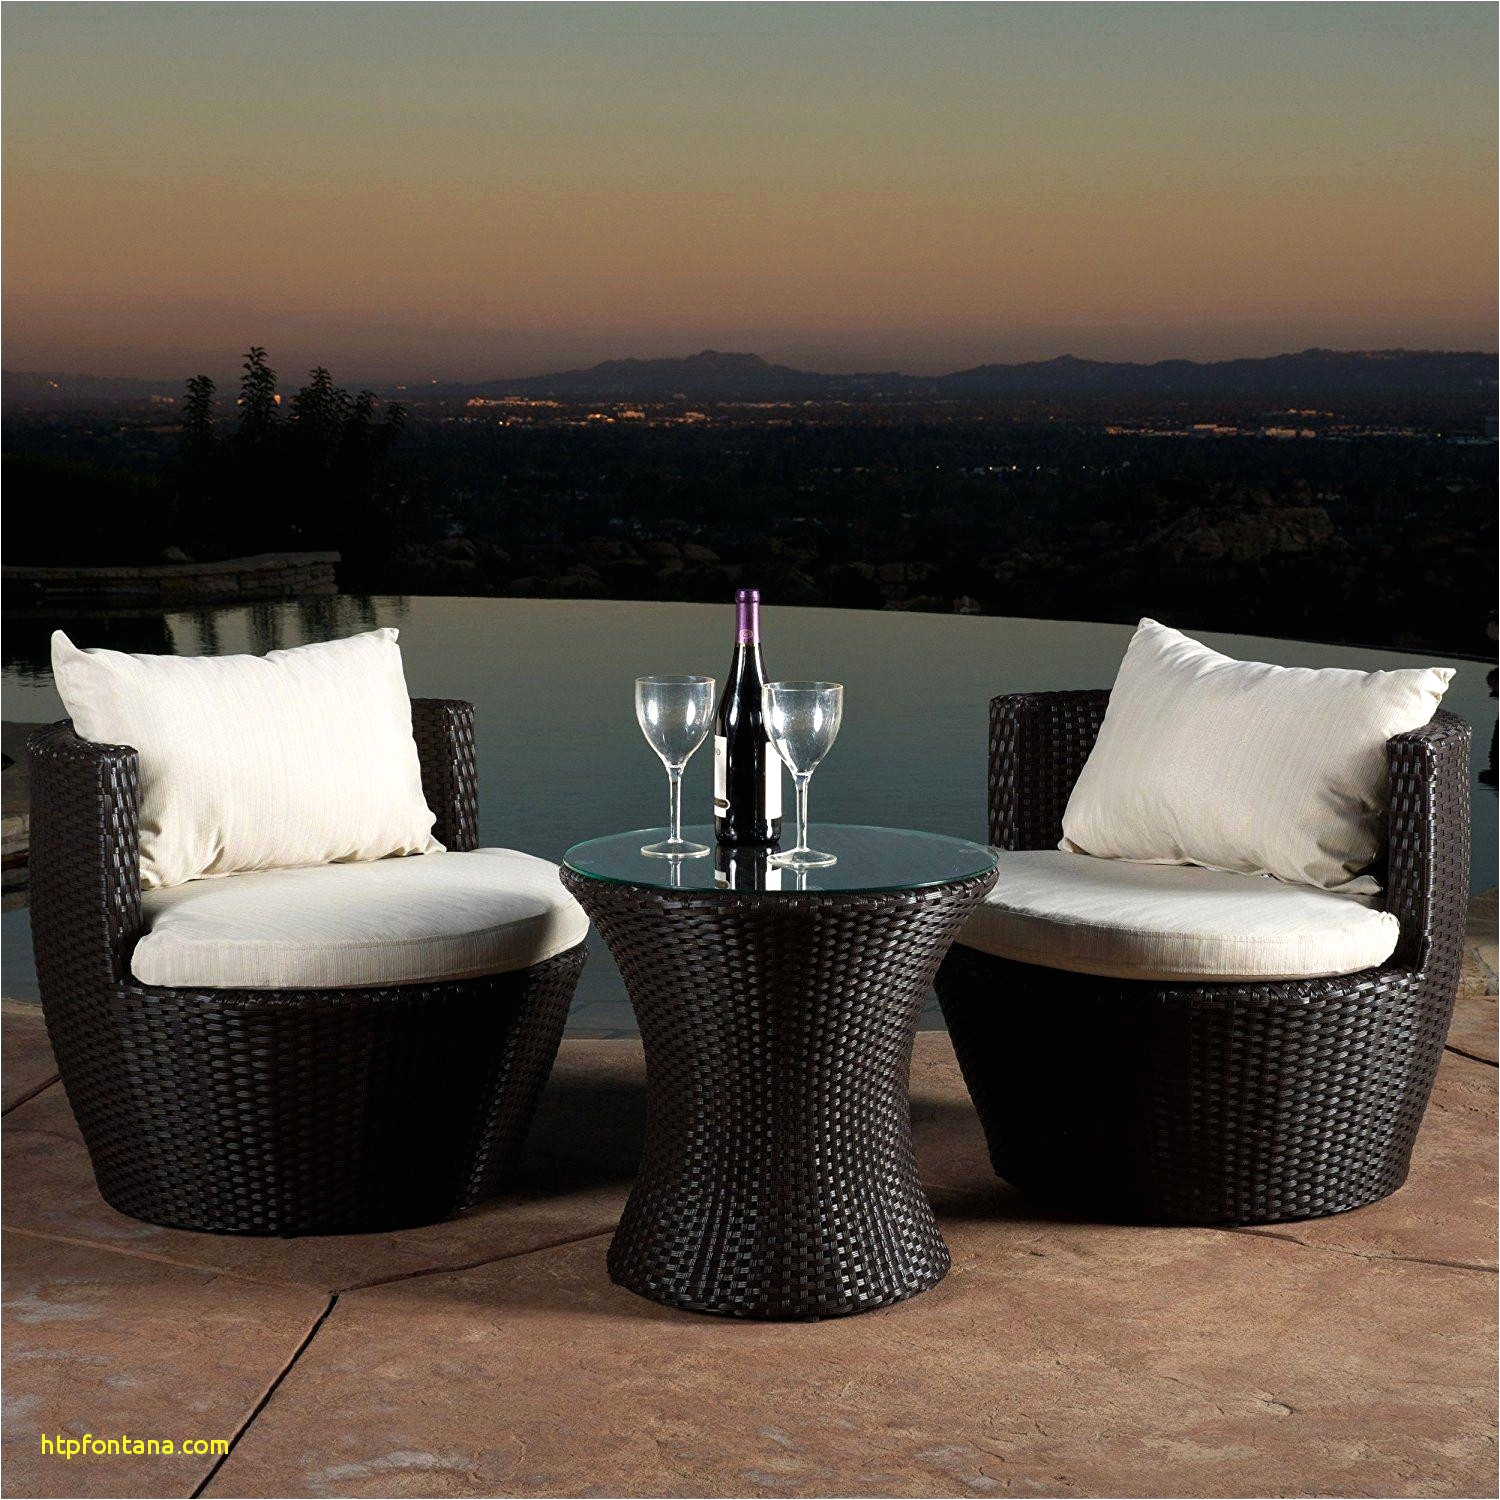 Mesmerizing Contemporary End Tables For Living Room With Rustic Outdoor Living Room Beautiful Patio Table 0d Archives Modern